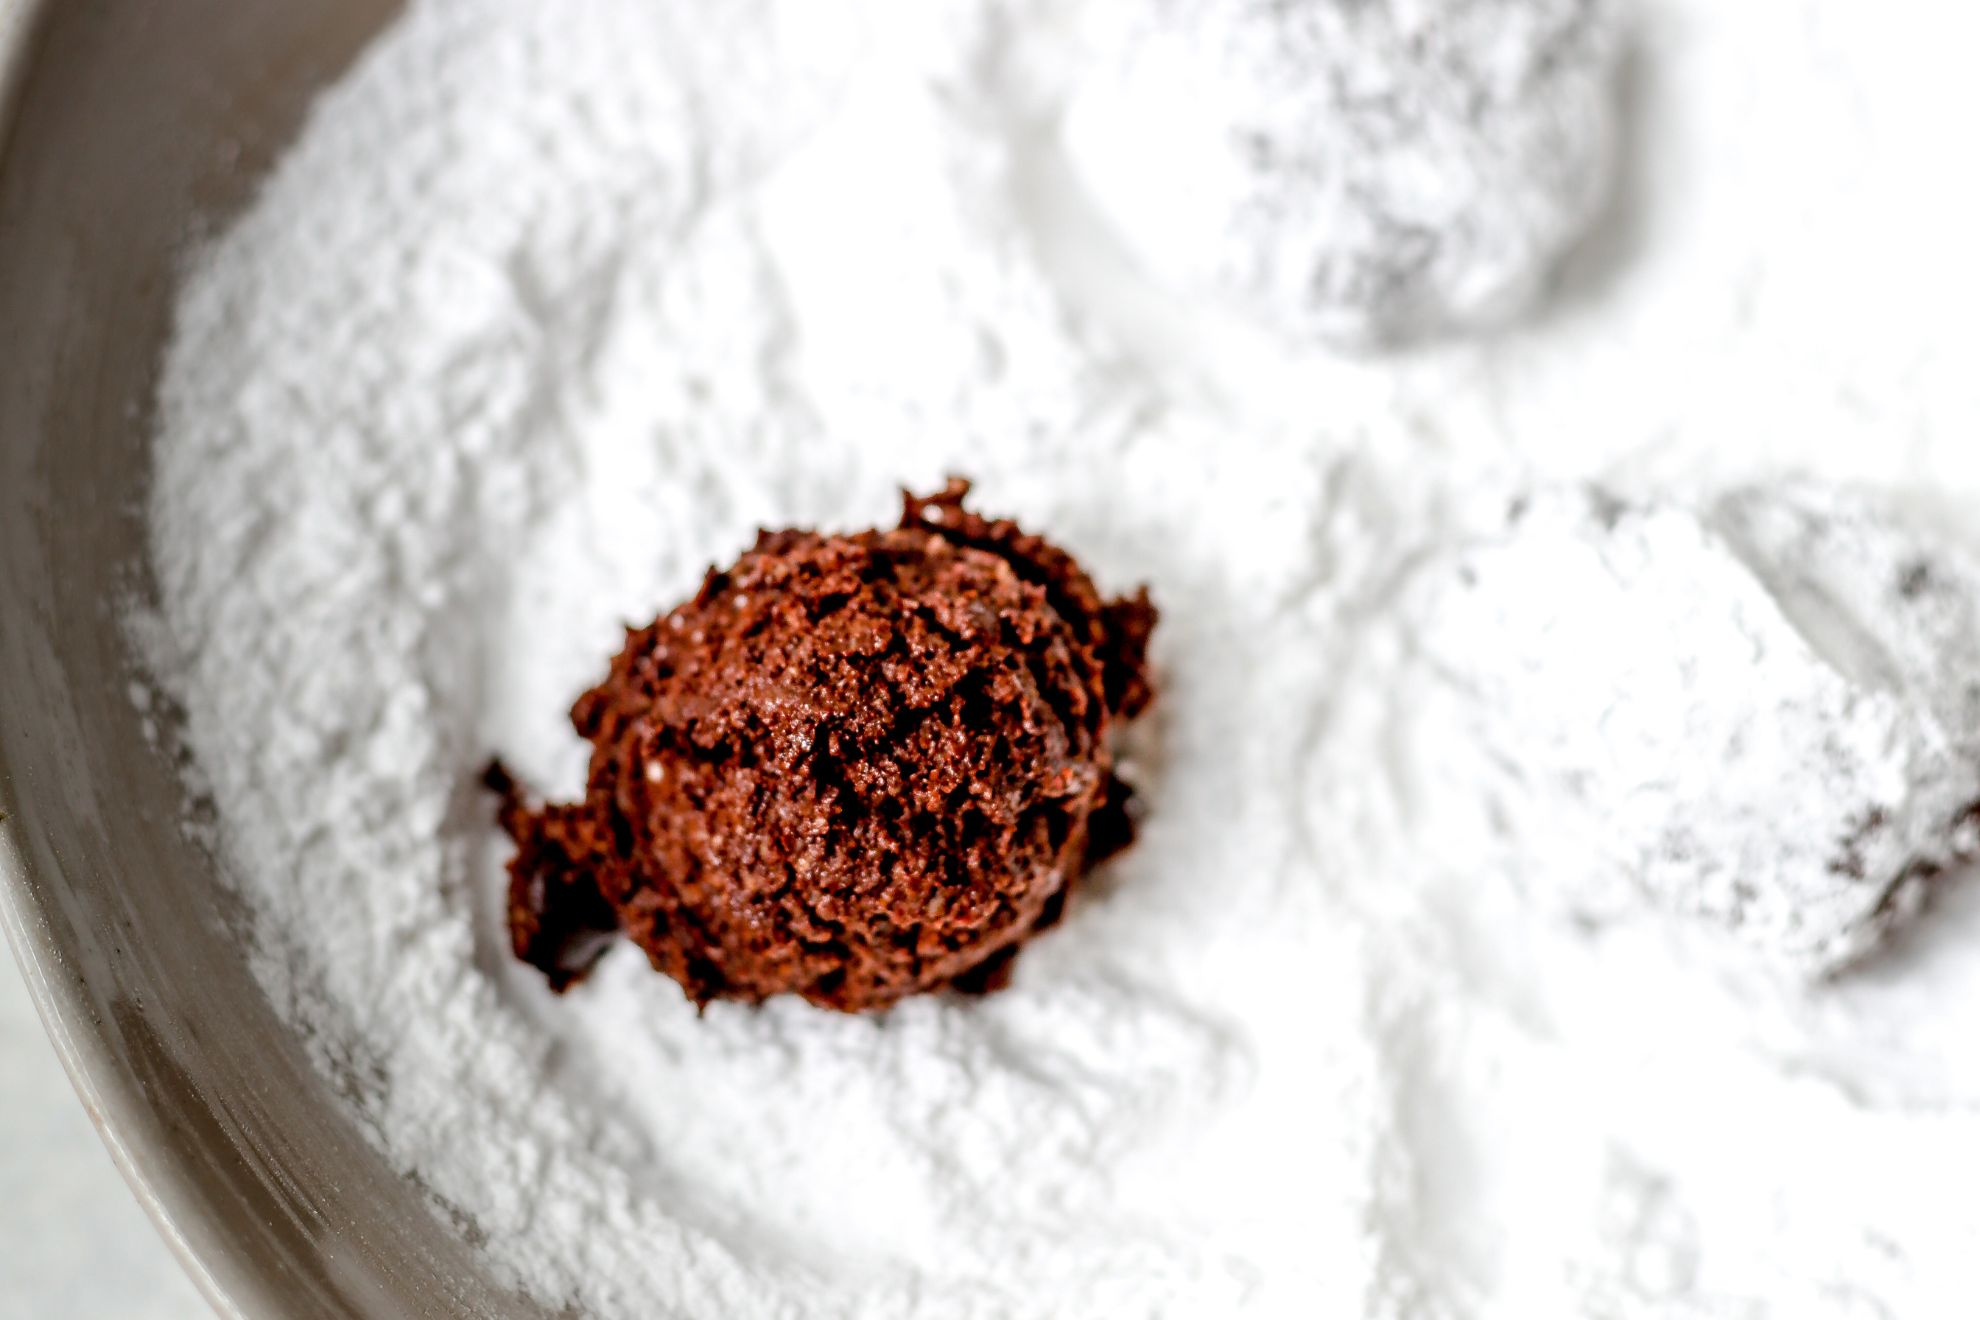 This is a horizontal image looking from a side view of powdered sugar in a bowl with balls of chocolate cookie dough in them. Two balls are coated in powdered sugar and the other, closest to the camera is not yet coated, sitting on top of the sugar.